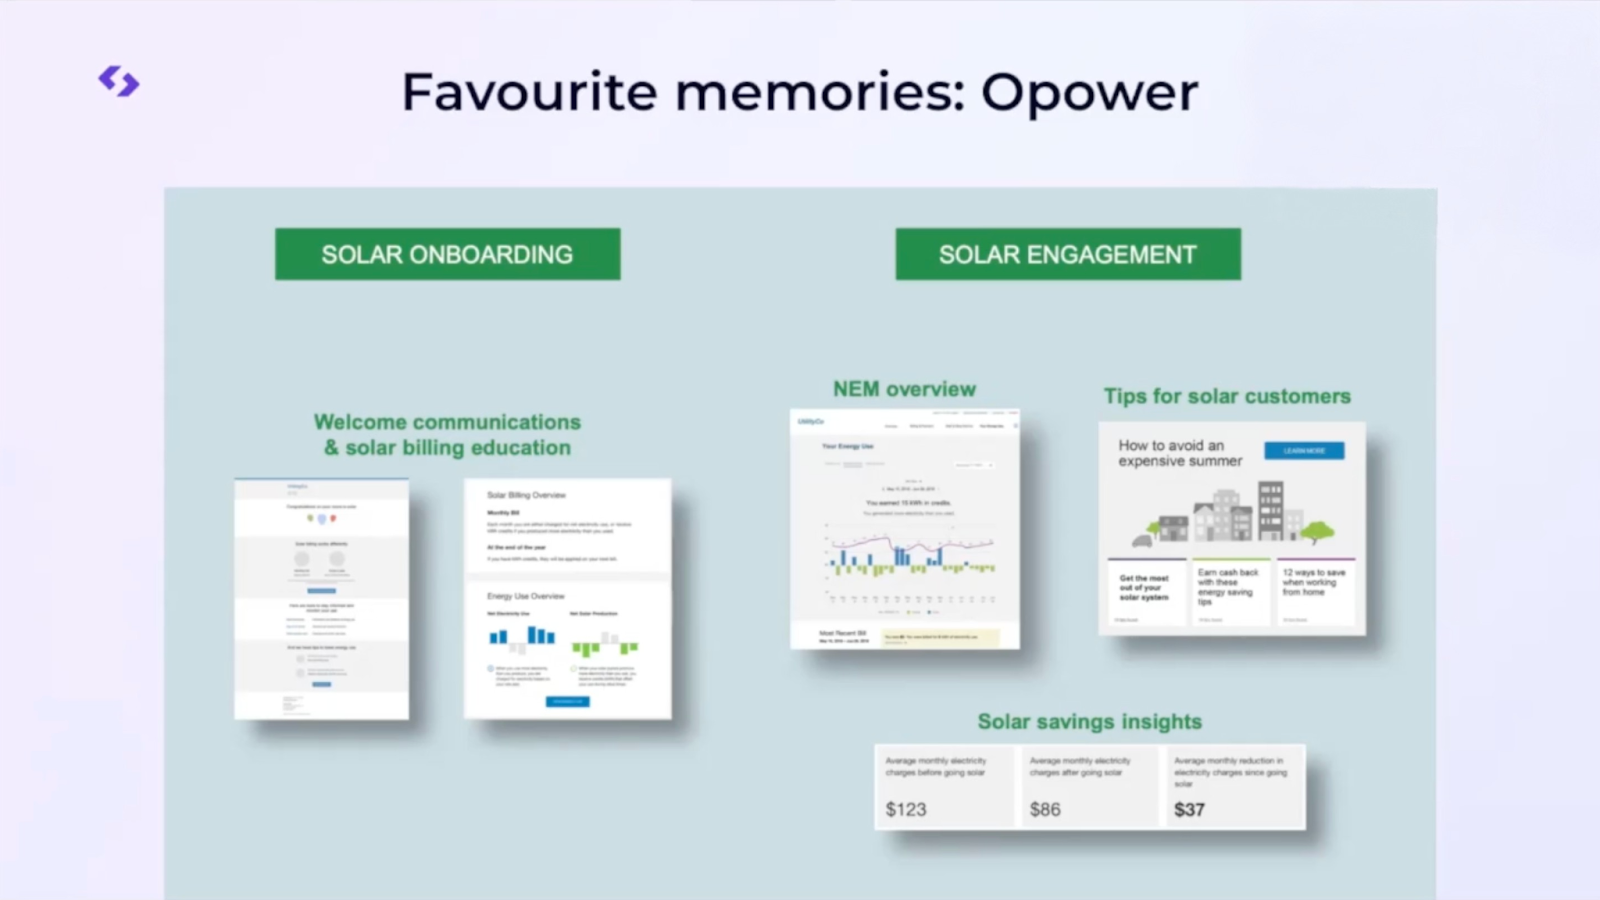 Title: Favourite memories: Opower. Images of solar onboarding and engagement communications.